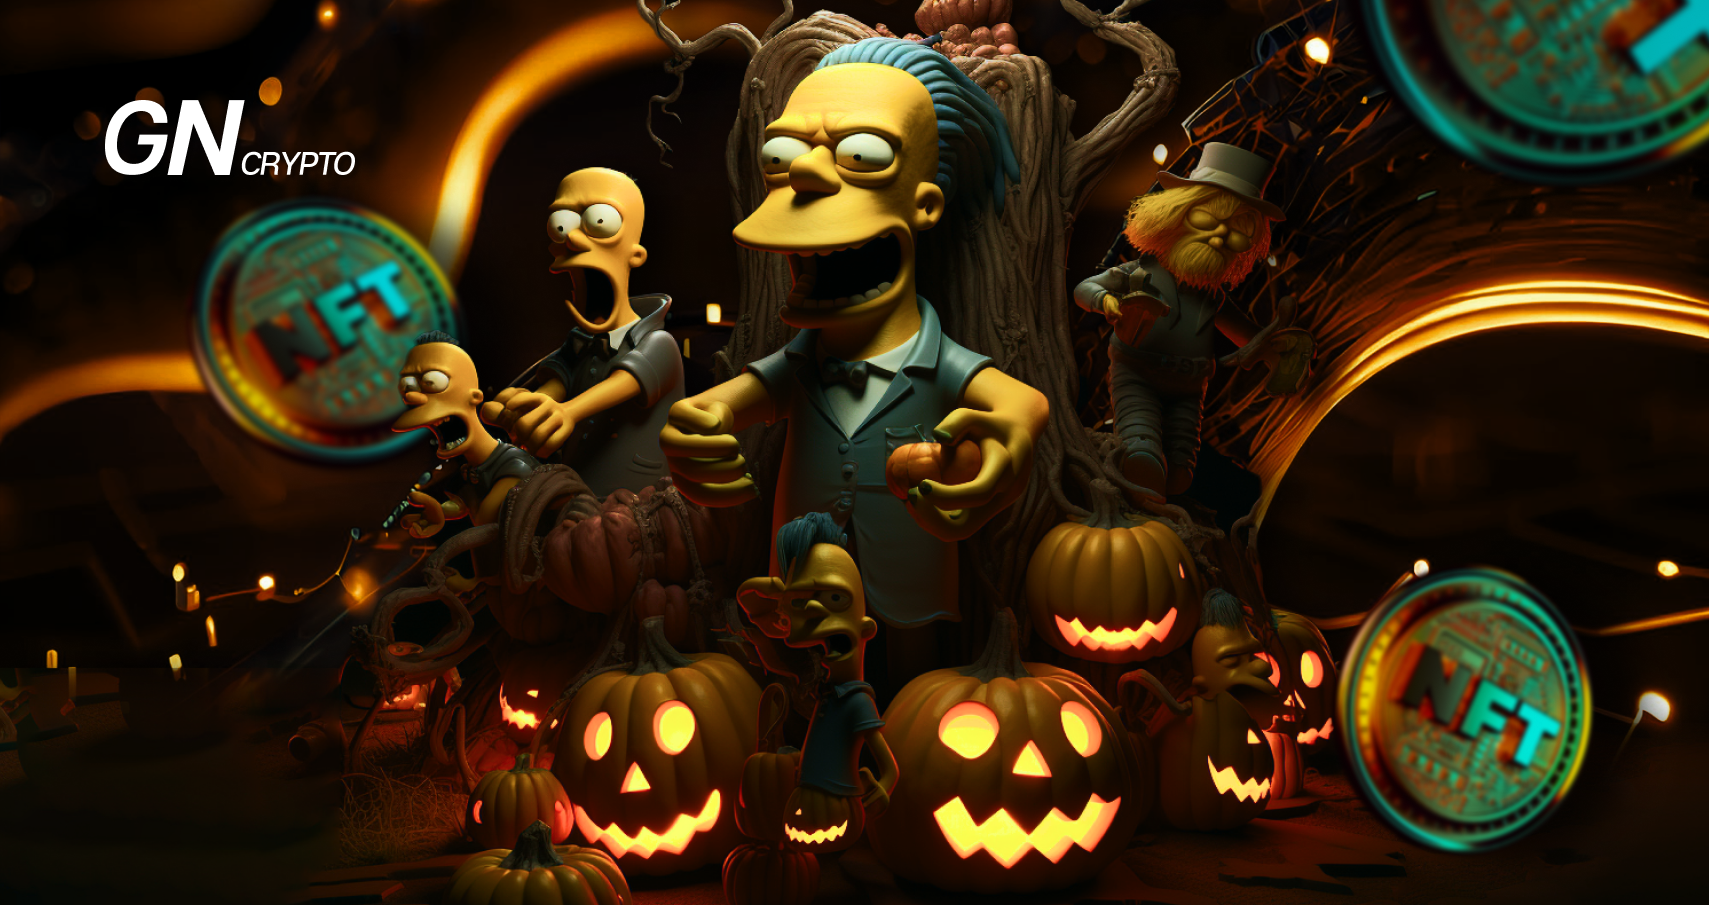 Photo - Simpsons NFT Collection Soars After Halloween Episode